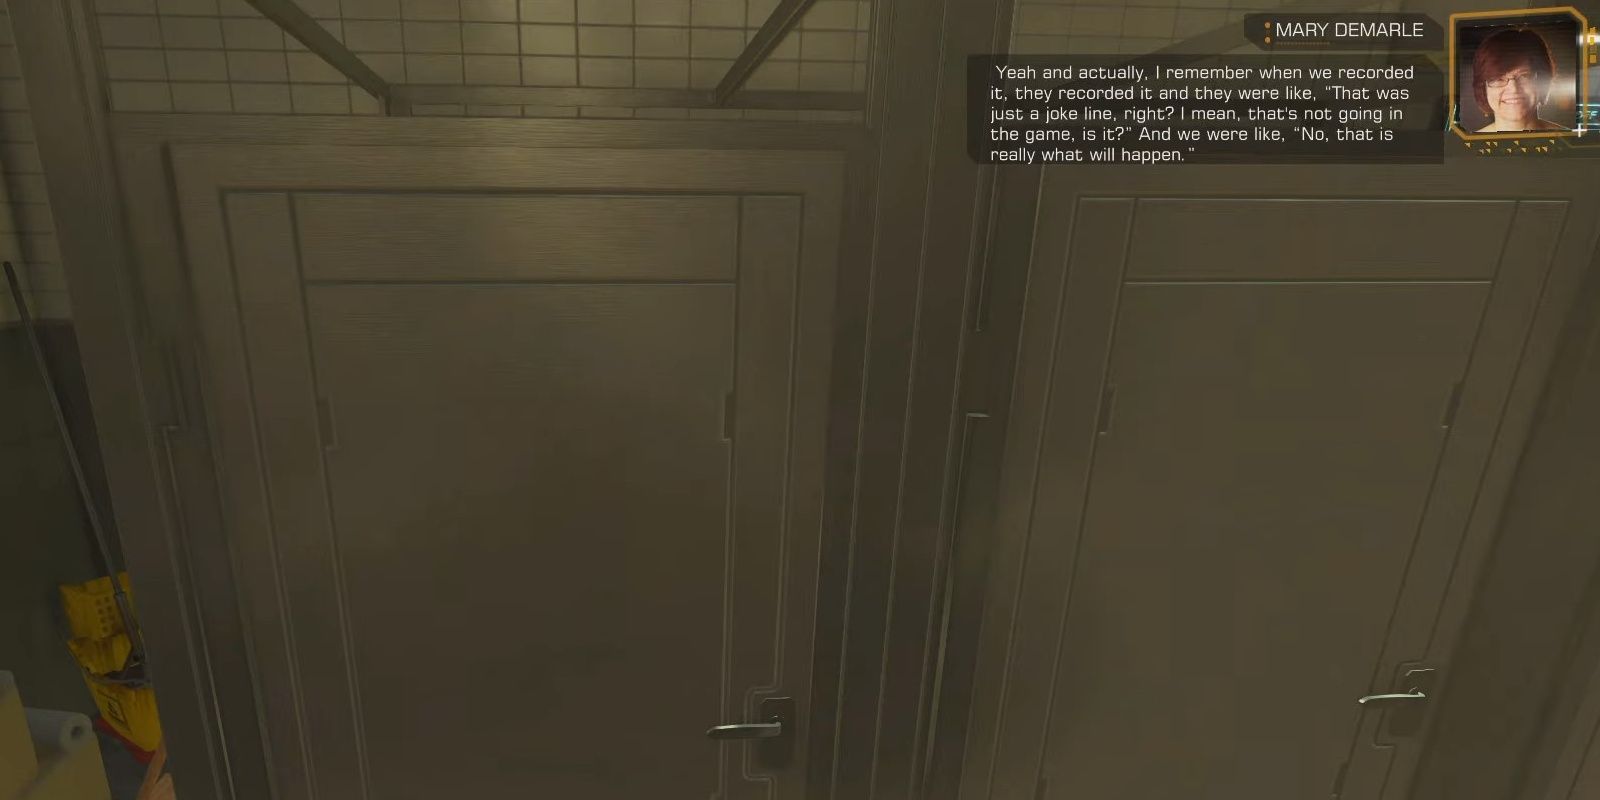 A commentary node by Mary DeMarle in the bathroom in Deus Ex: Human Revolution.